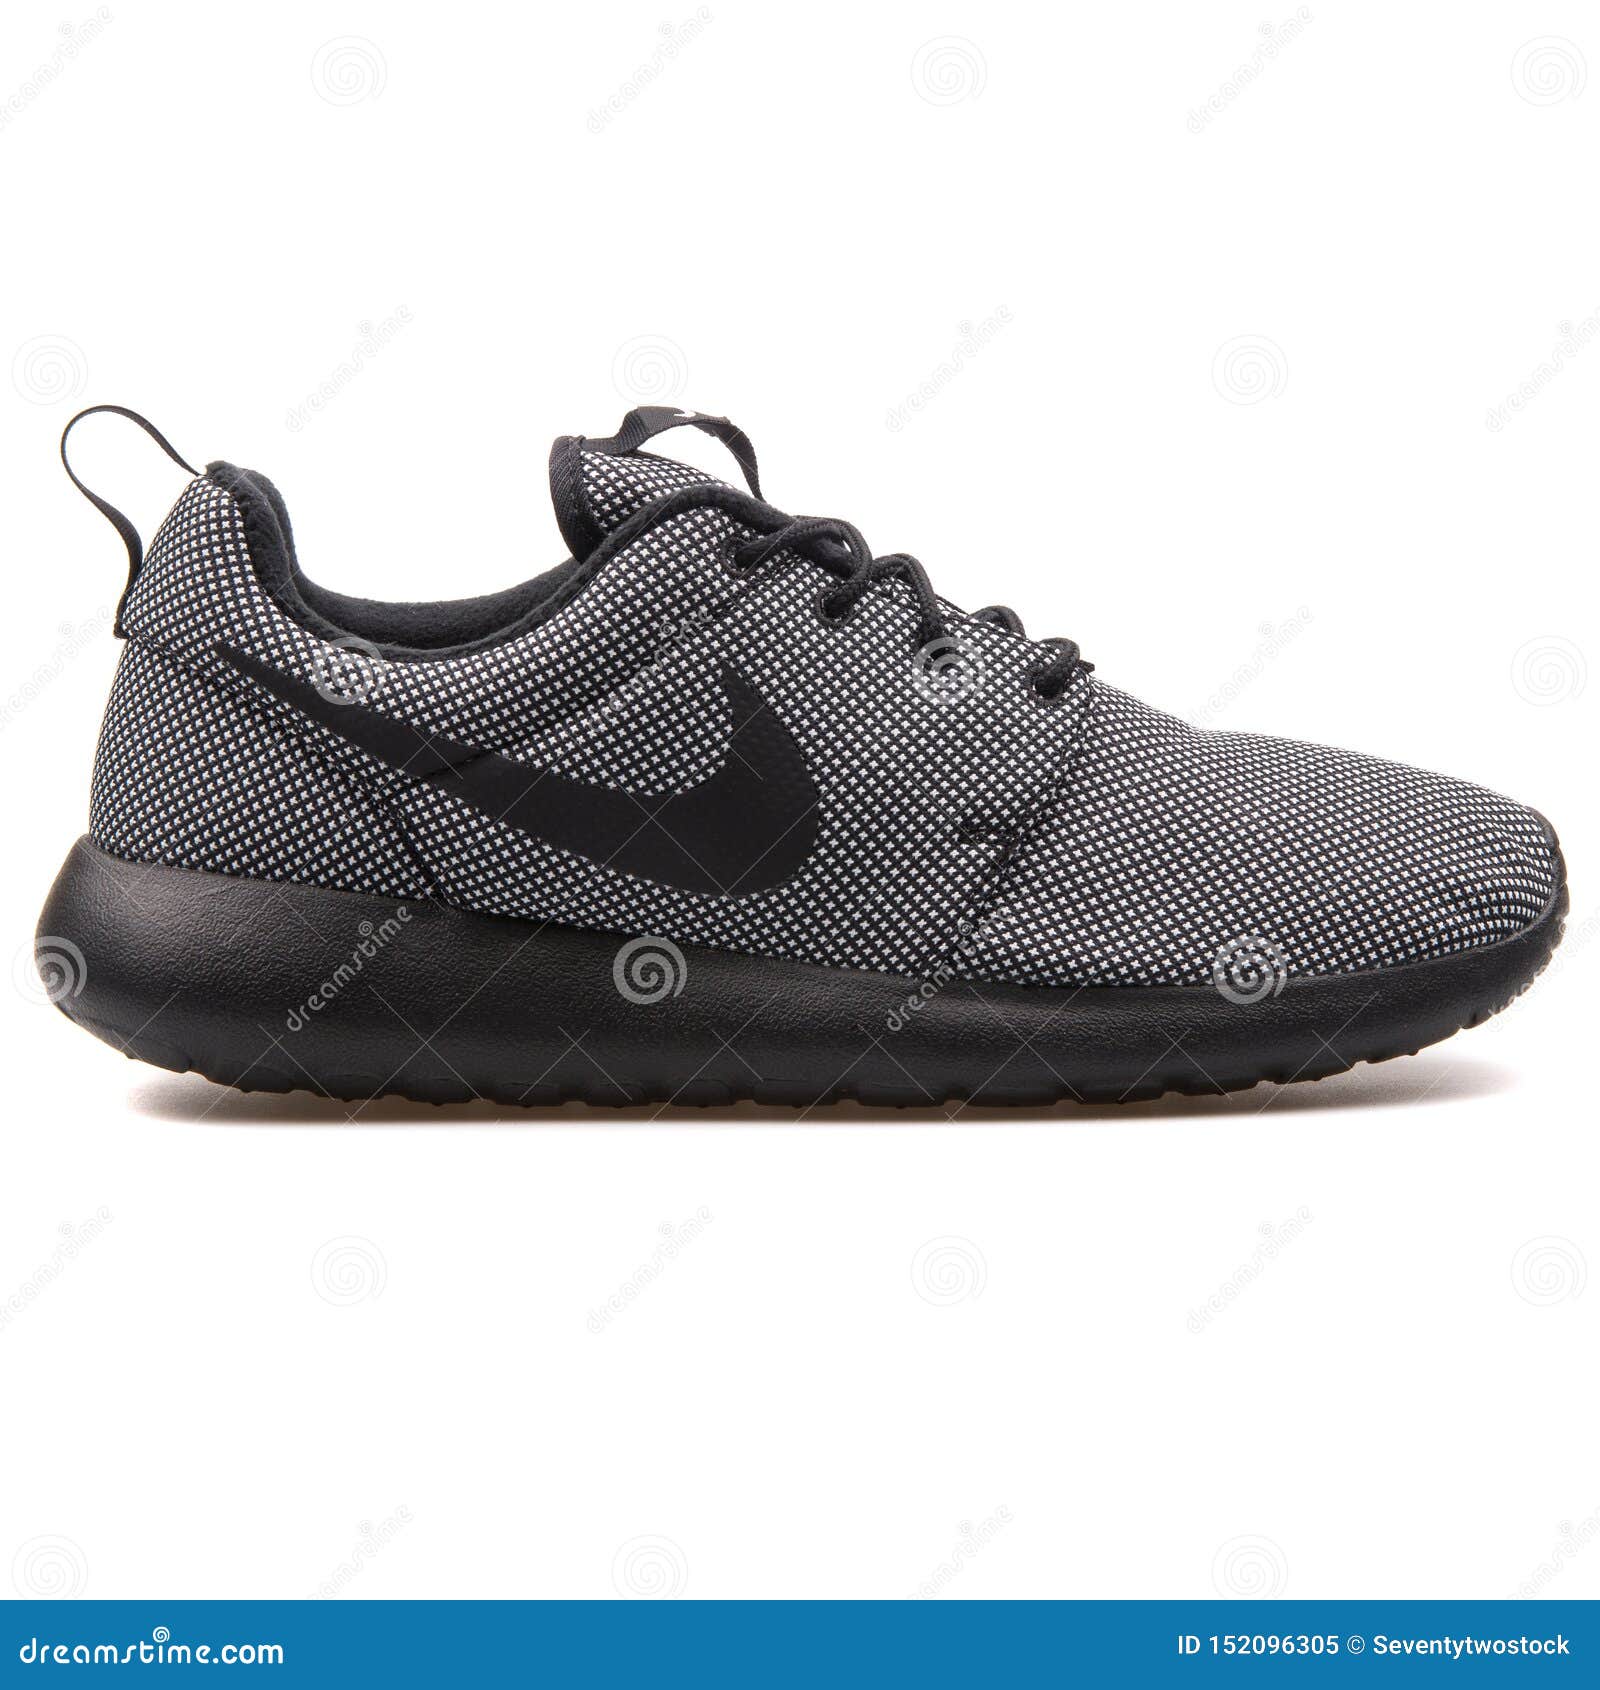 Nike Roshe One Premium Black and White Sneaker Editorial Image - Image of  fashion, leather: 152096305